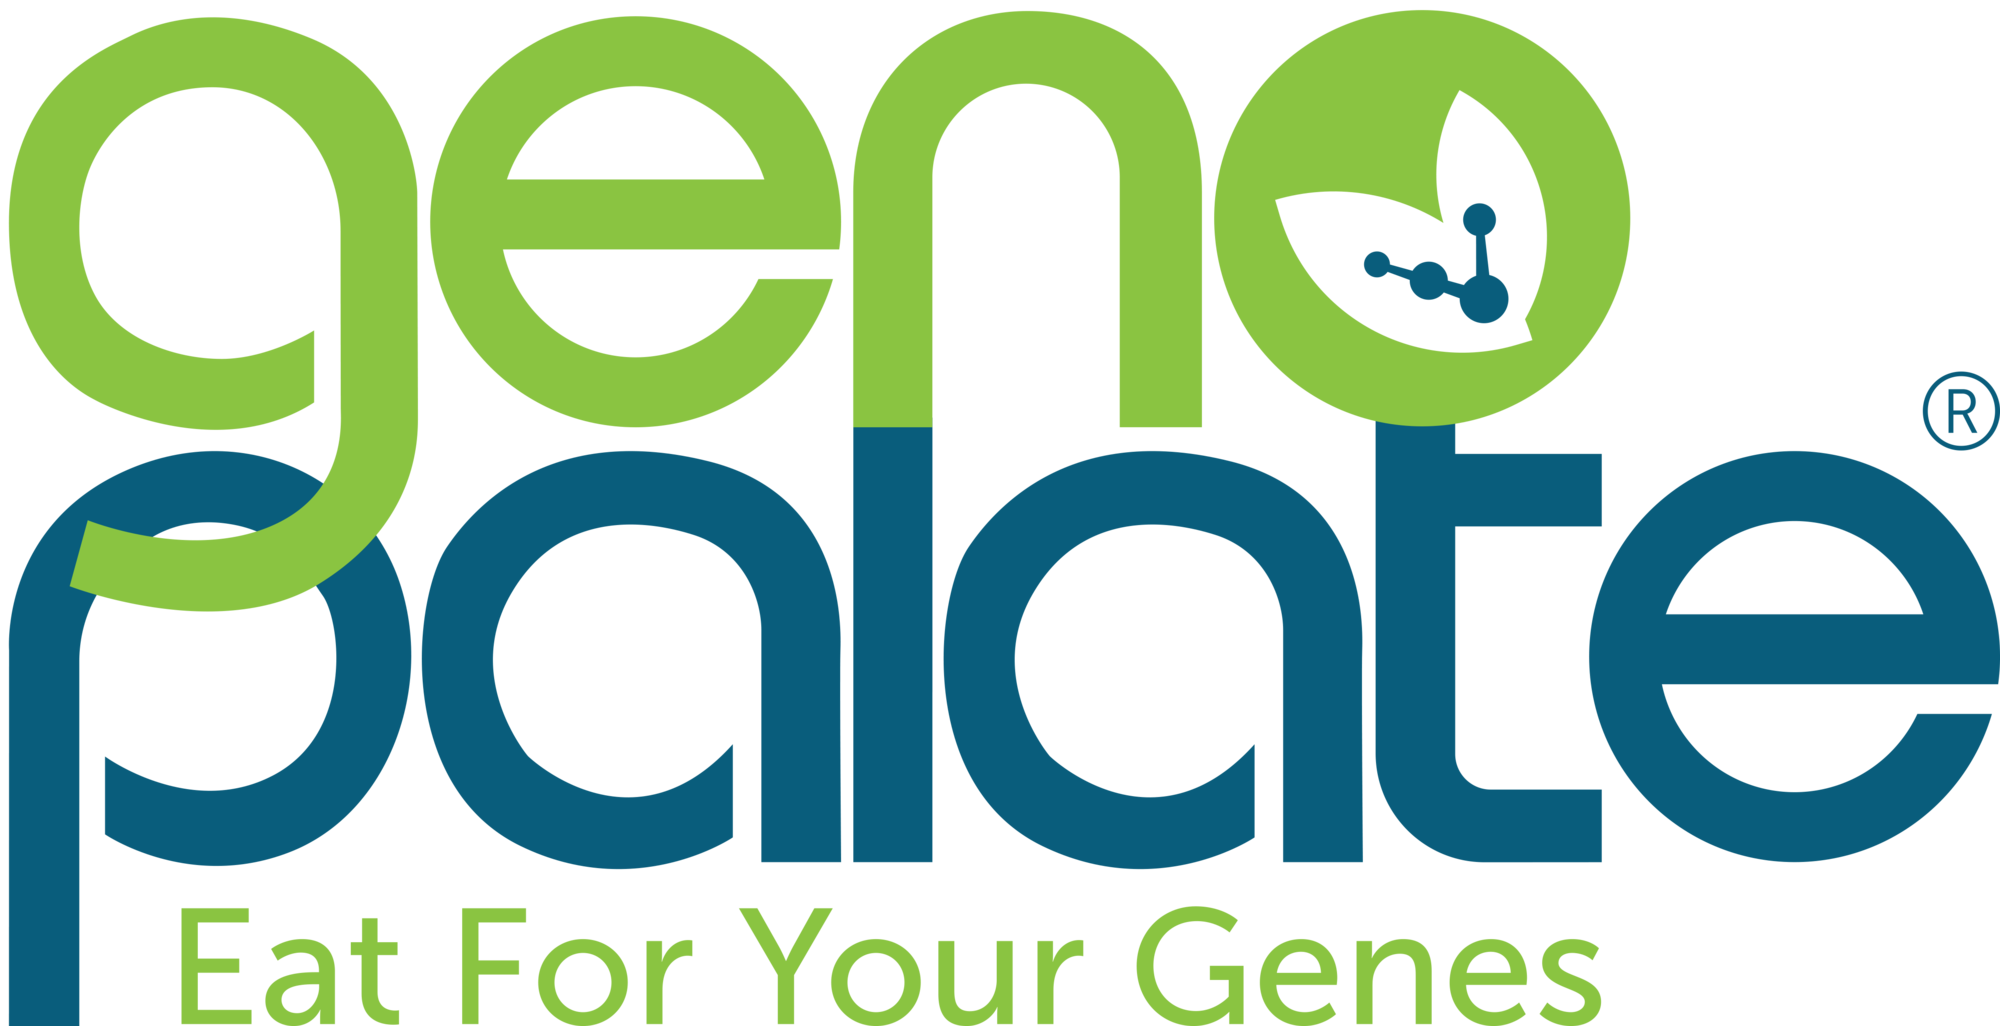 GenoPalate releases new telenutrition programs with a focus on personalized nutrition